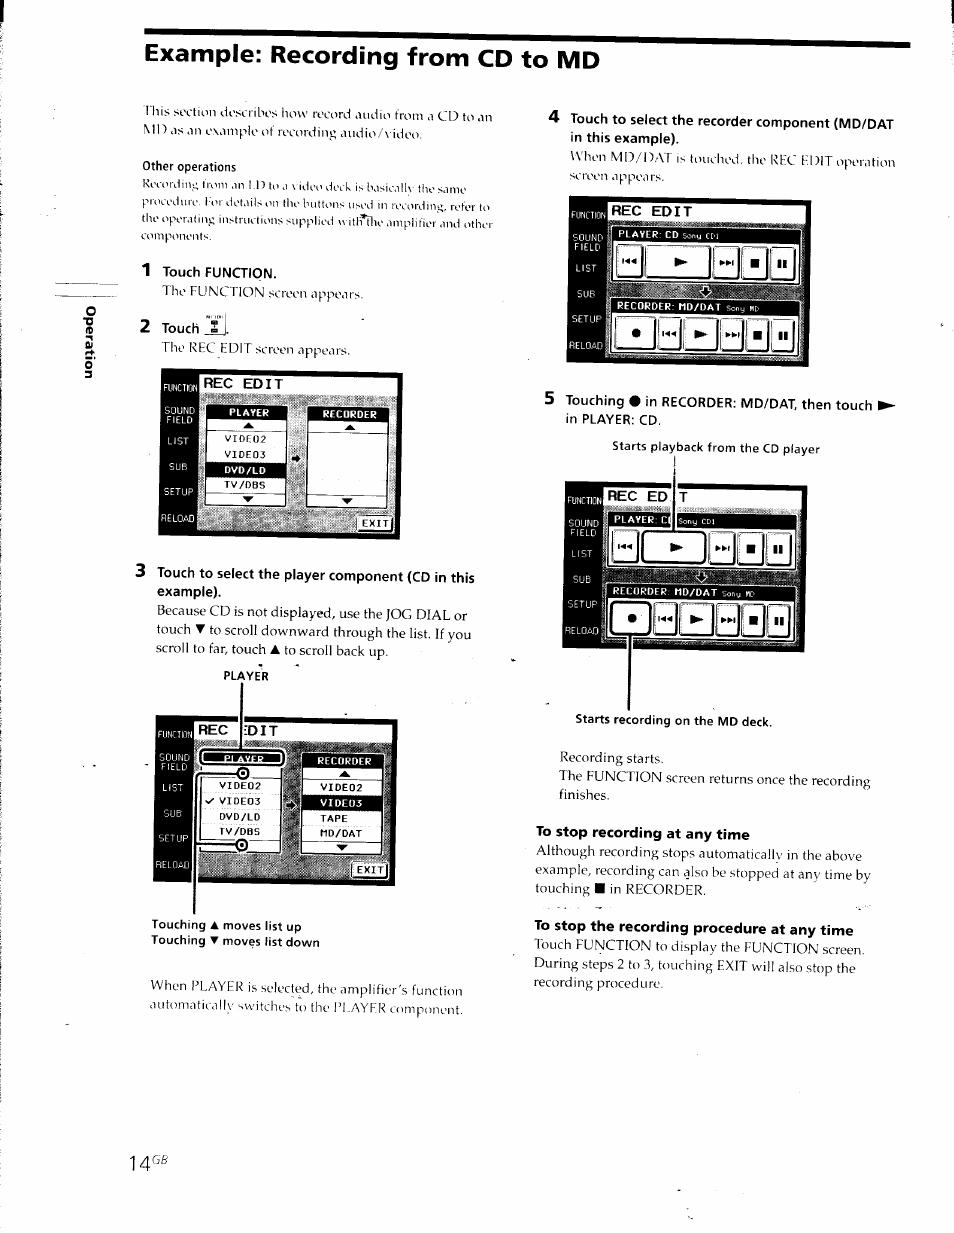 Other operations, 1 touch function, 2 touch | To stop recording at any time, To stop the recording procedure at any time, Example: recording from cd to md | Sony RM-TP501E Manuel d'utilisation | Page 14 / 49